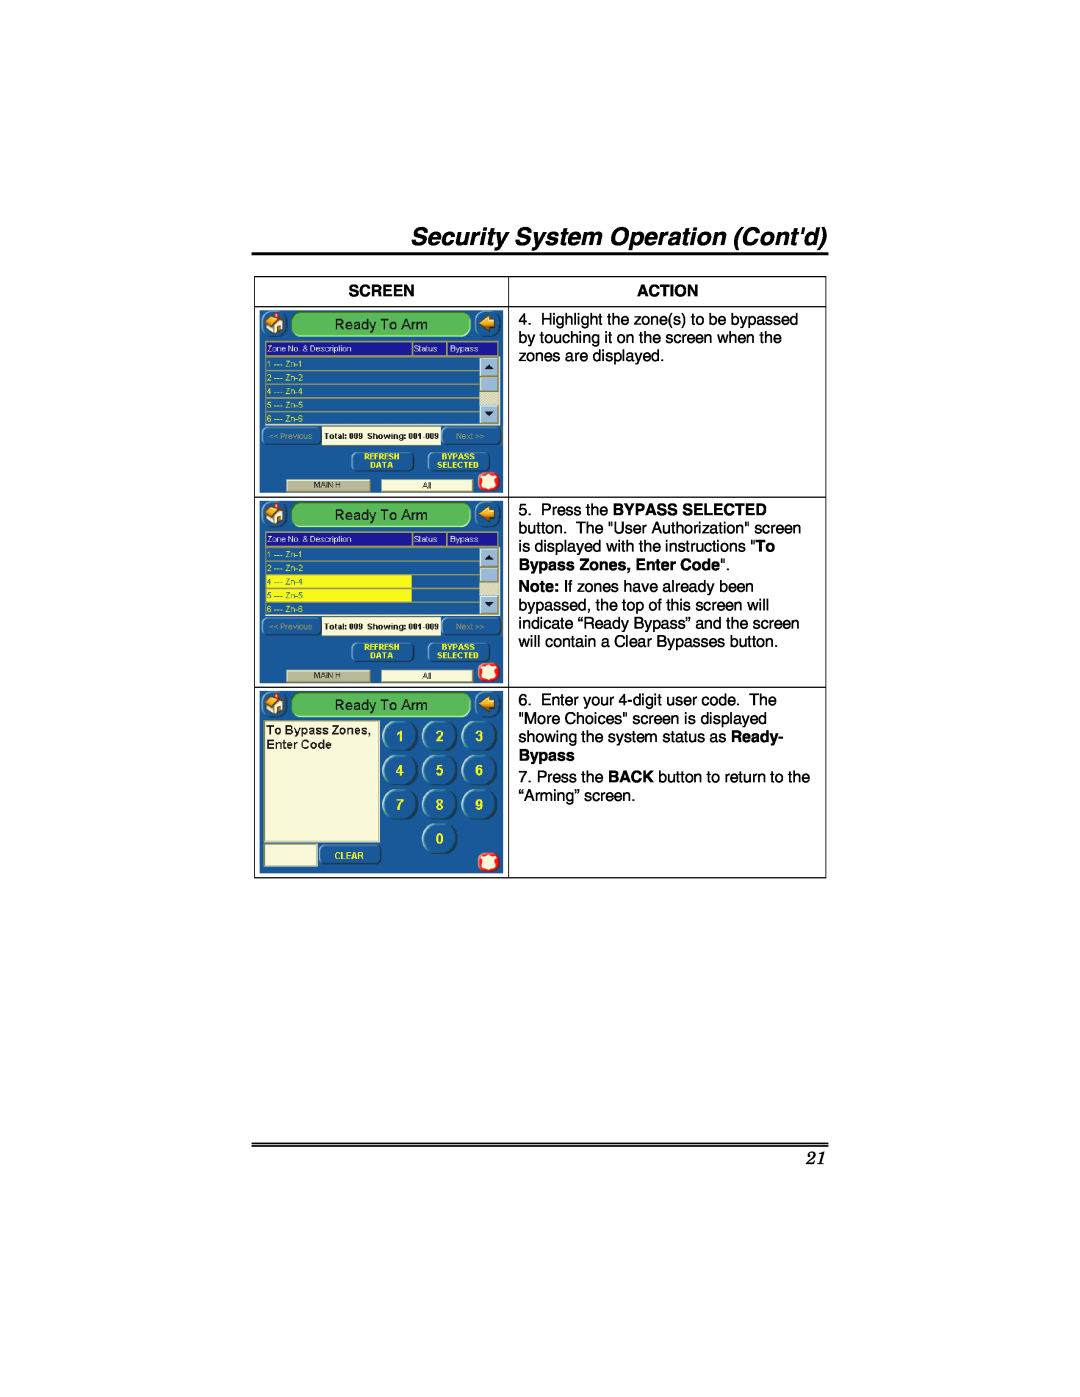 Honeywell 6271 manual Security System Operation Contd, Screen, Action, Press the BYPASS SELECTED, Bypass Zones, Enter Code 